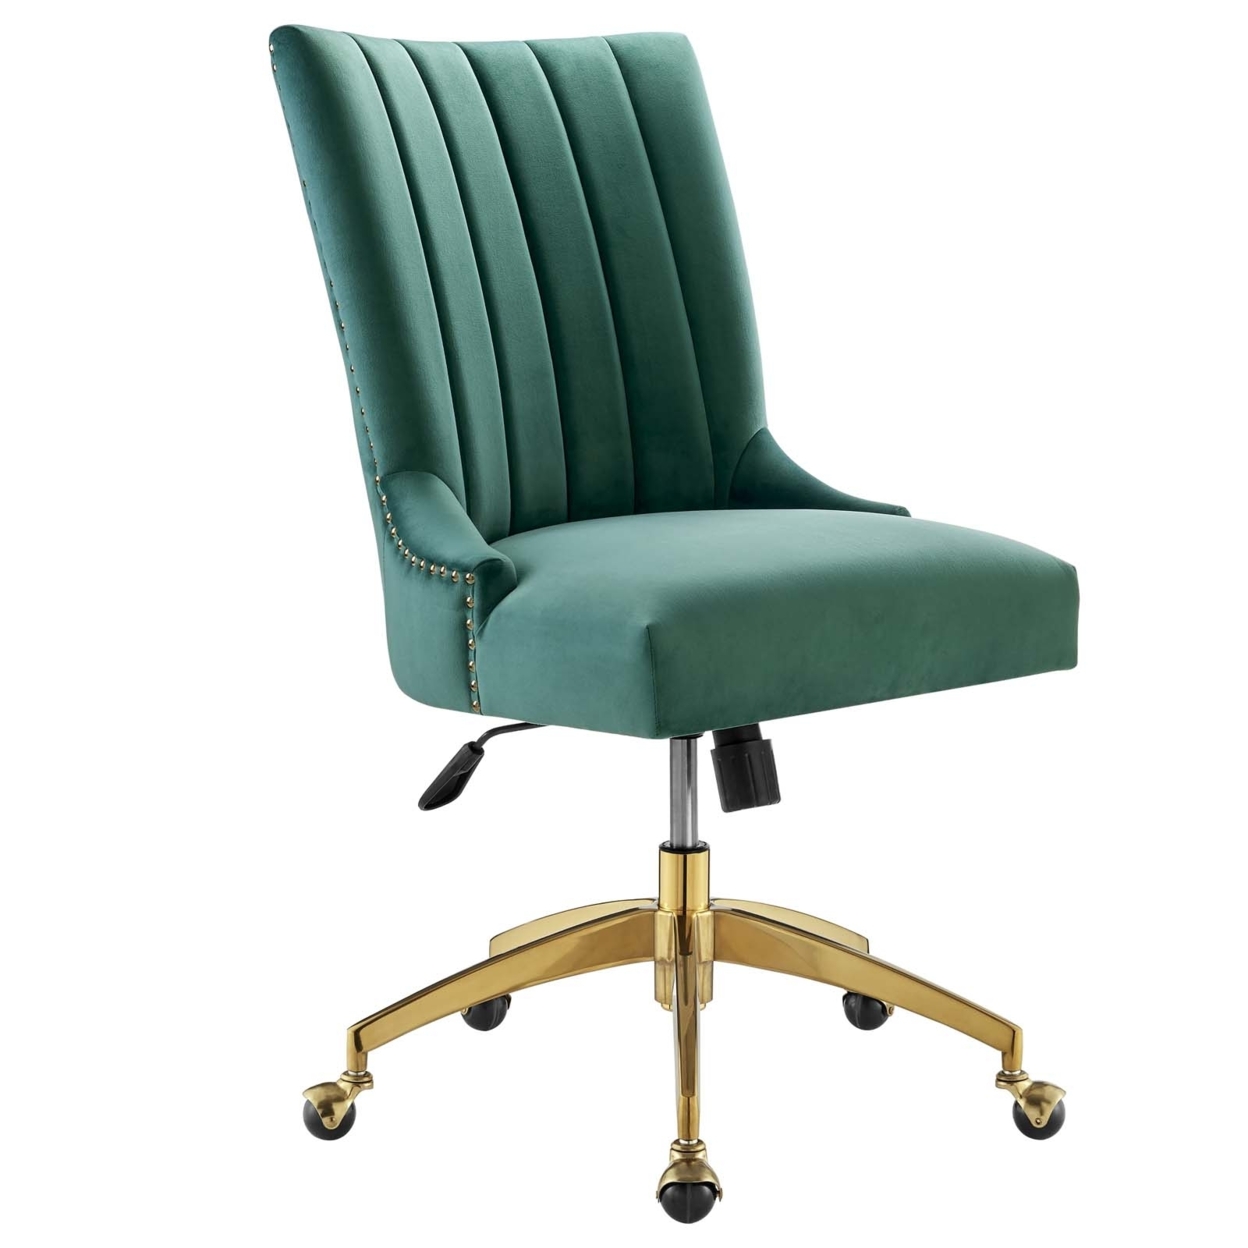 Empower Channel Tufted Performance Velvet Office Chair, Gold Teal